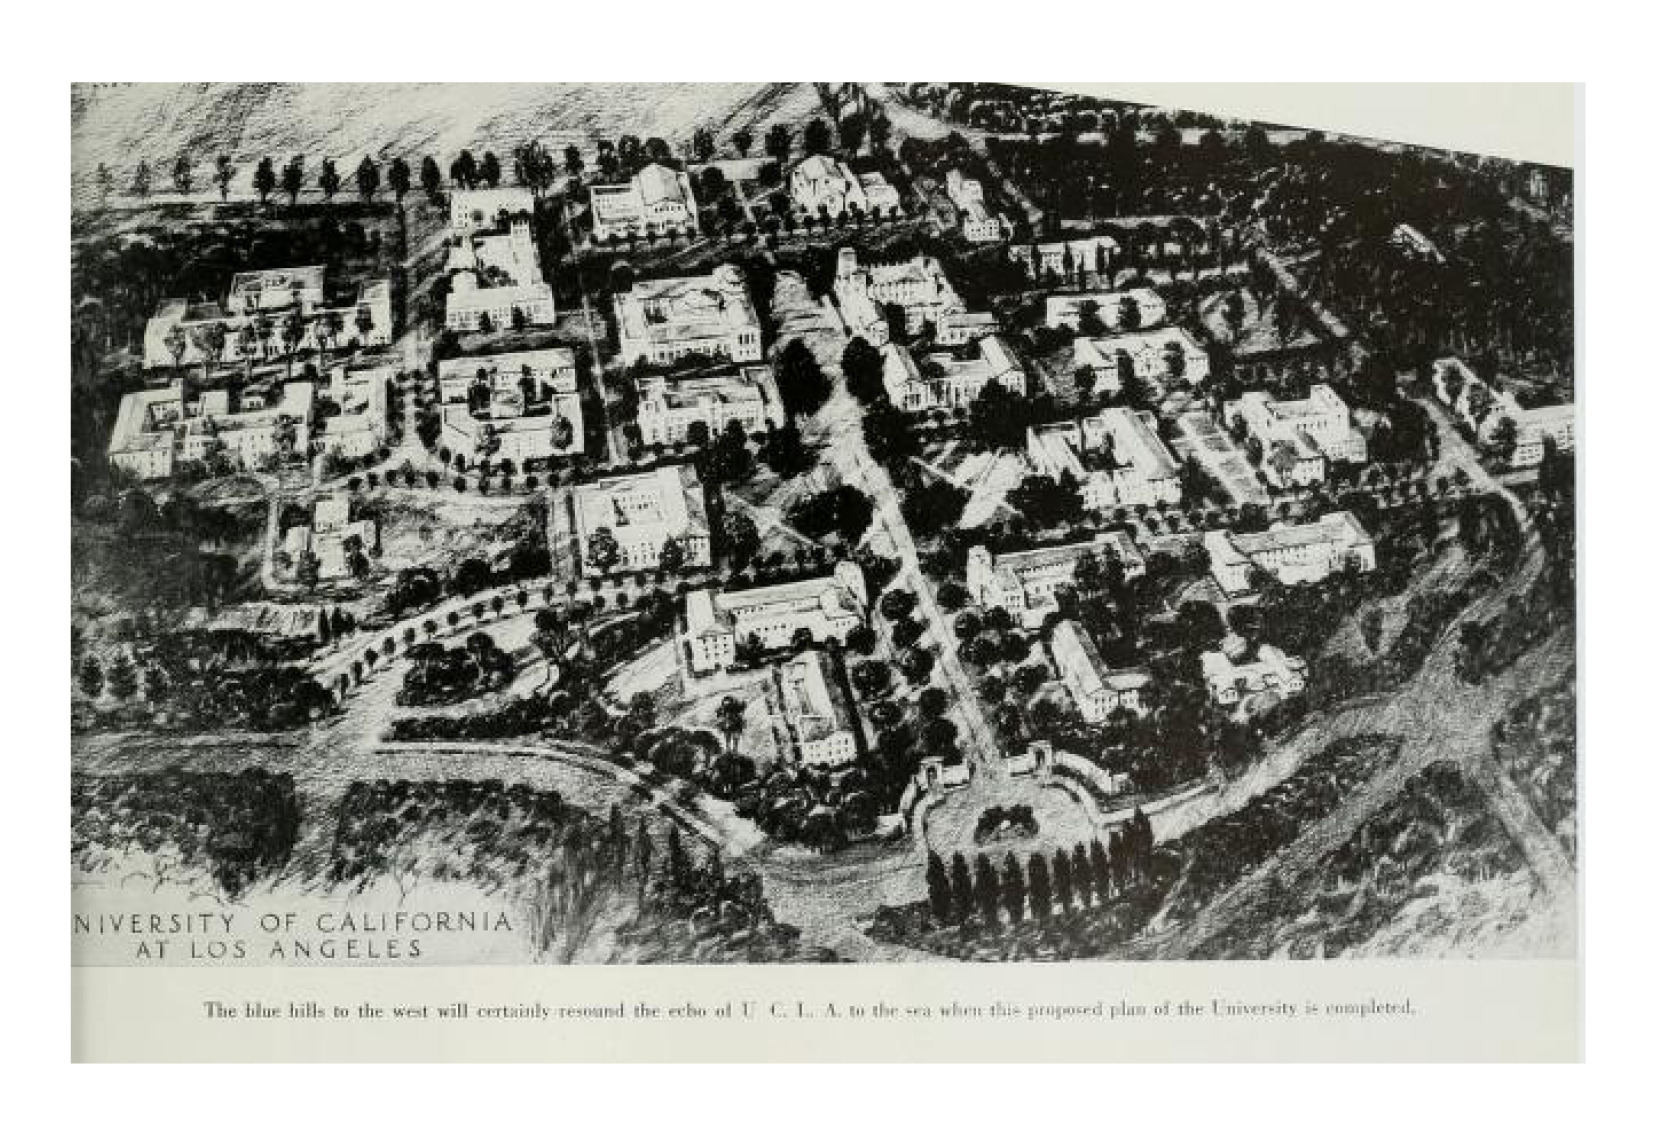 A black and white illustration from UCLA's 1947 yearbook depicting the university's expansion in Westwood.